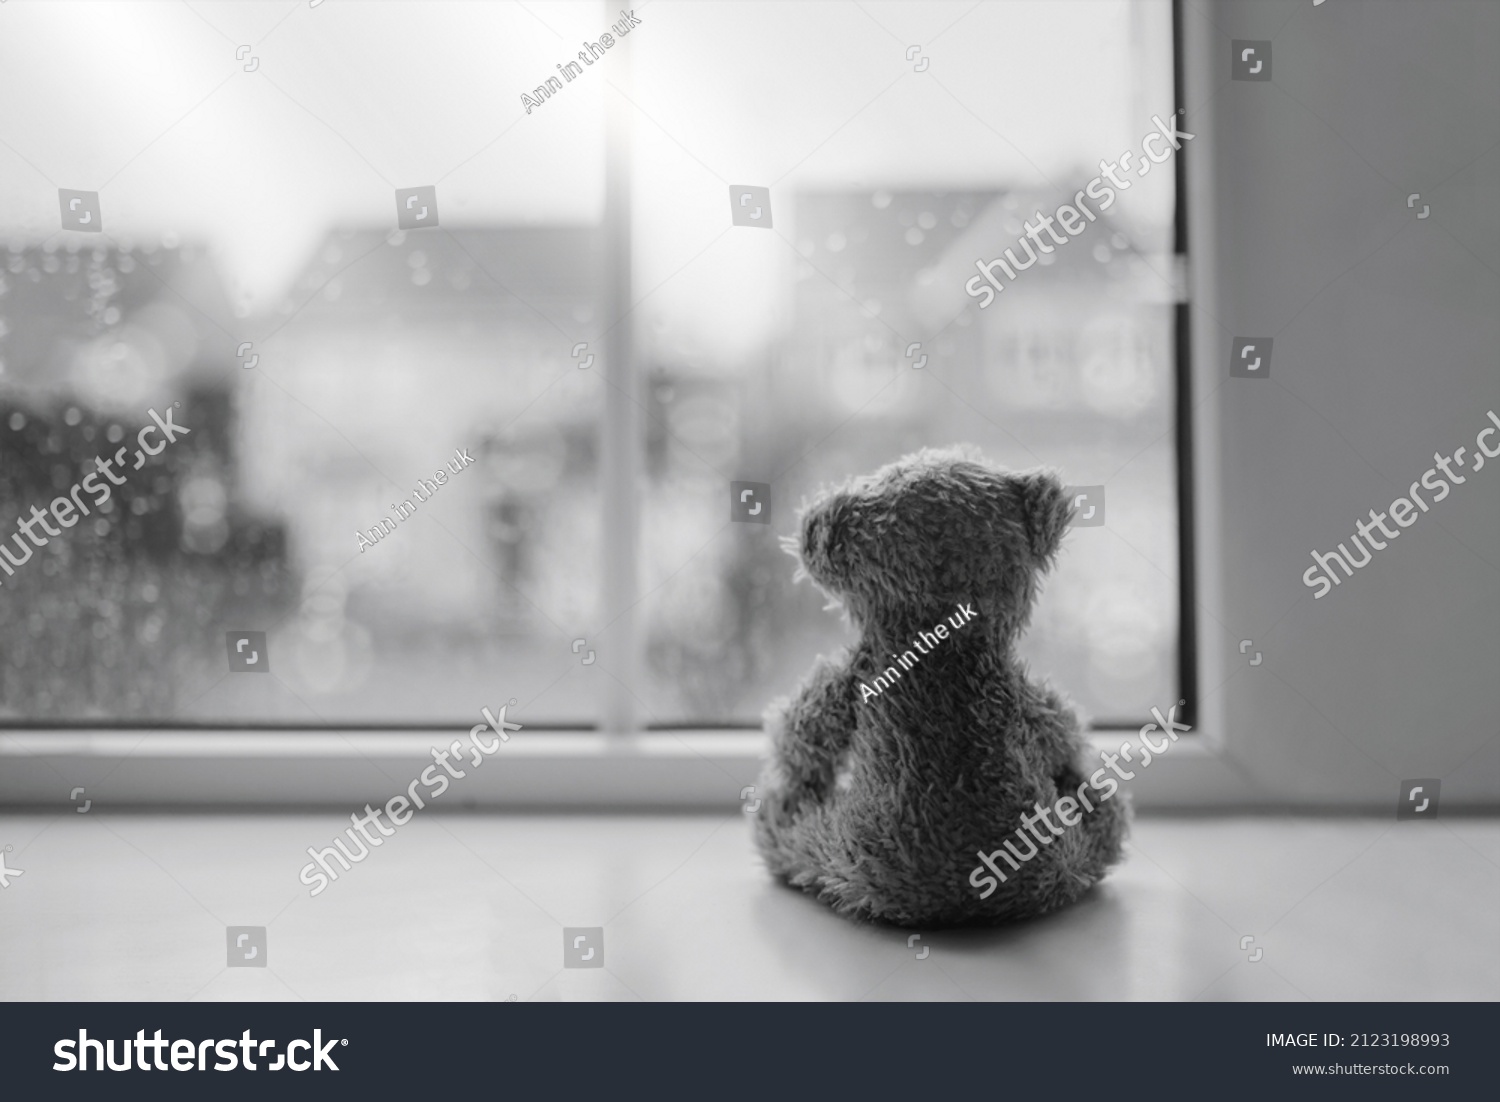 Black and white Rear view Lonely bear doll sitting alone looking out of window, Sad teddy bear sitting next to window in rainy day, lost toy, Loneliness concept, International missing Children day #2123198993